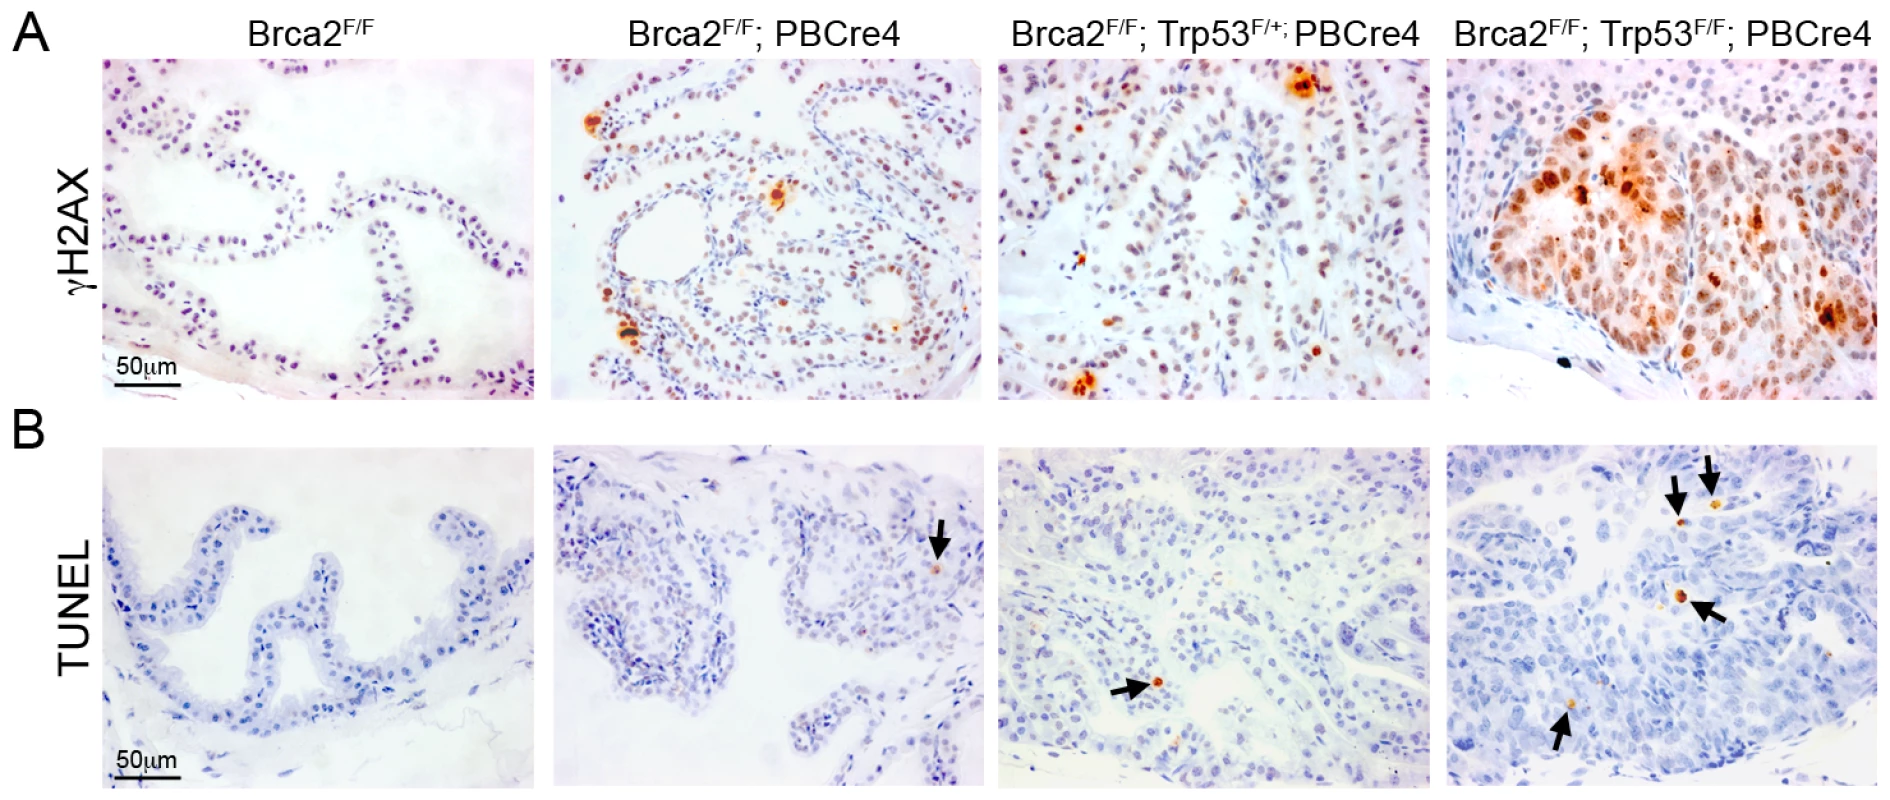 <i>Brca2;Trp53</i> mutants have increased DNA damage and apoptosis.